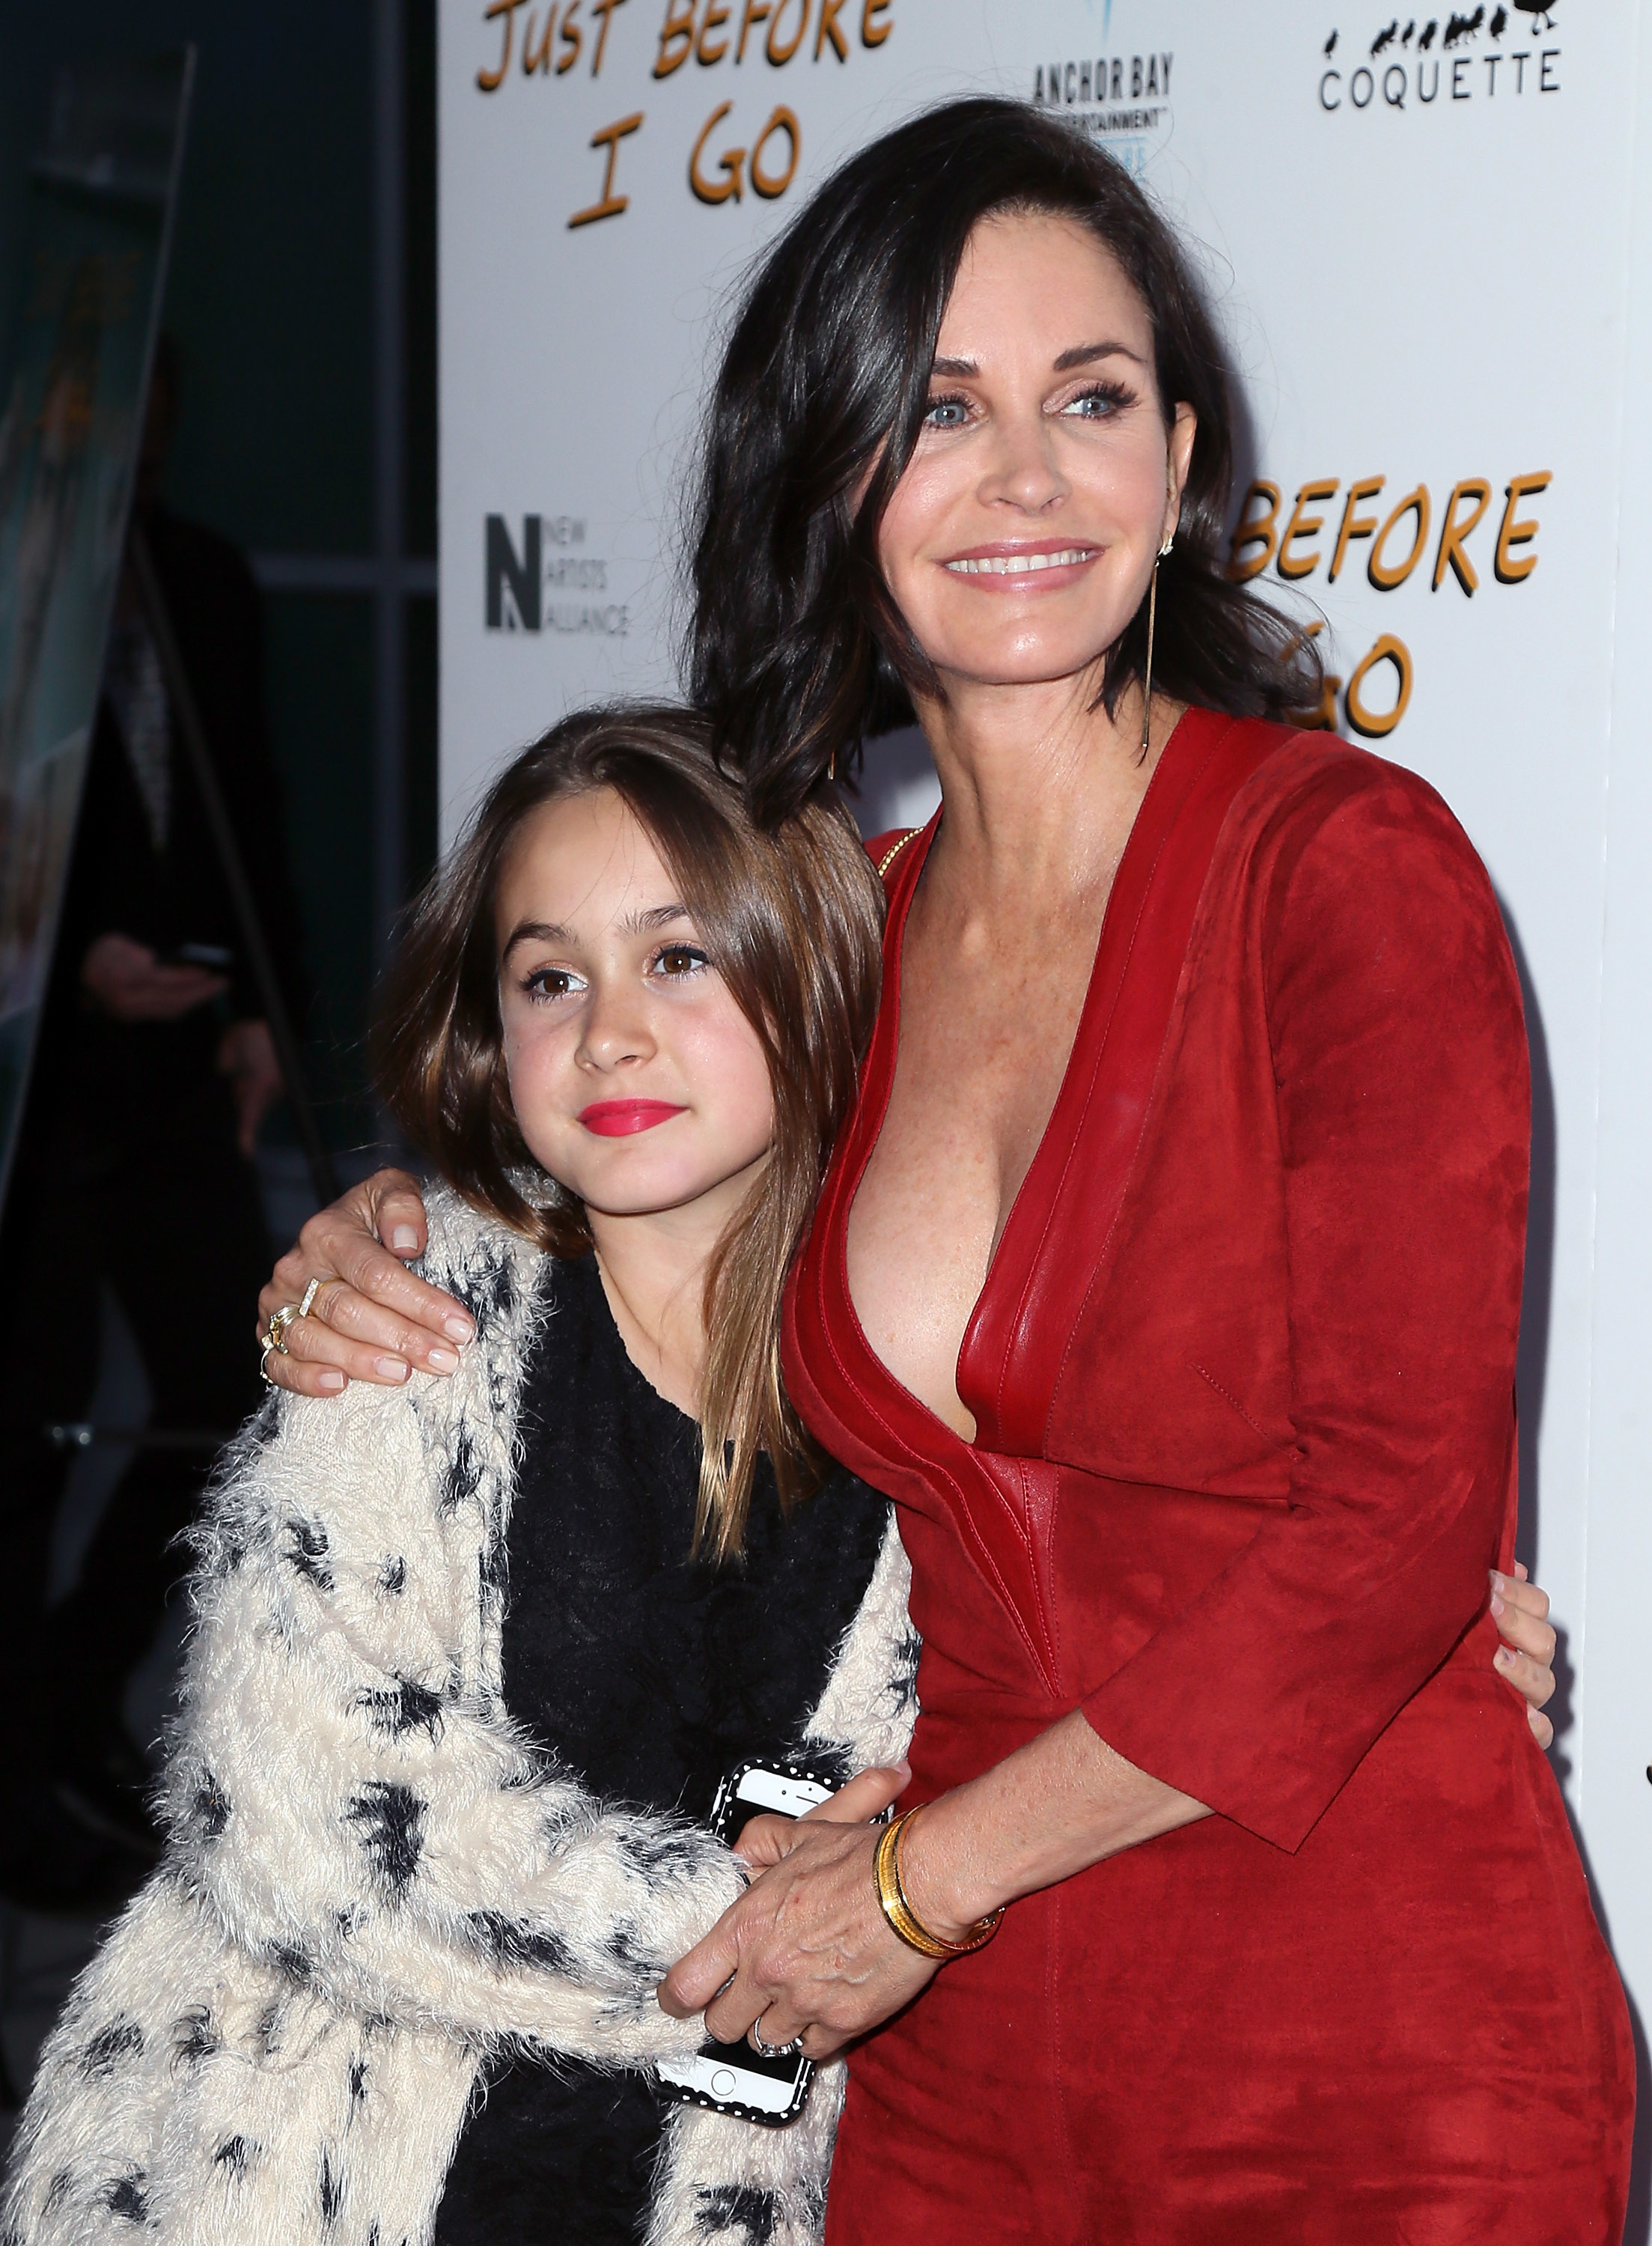 Courteney Cox with daughter Coco Arquette at an event